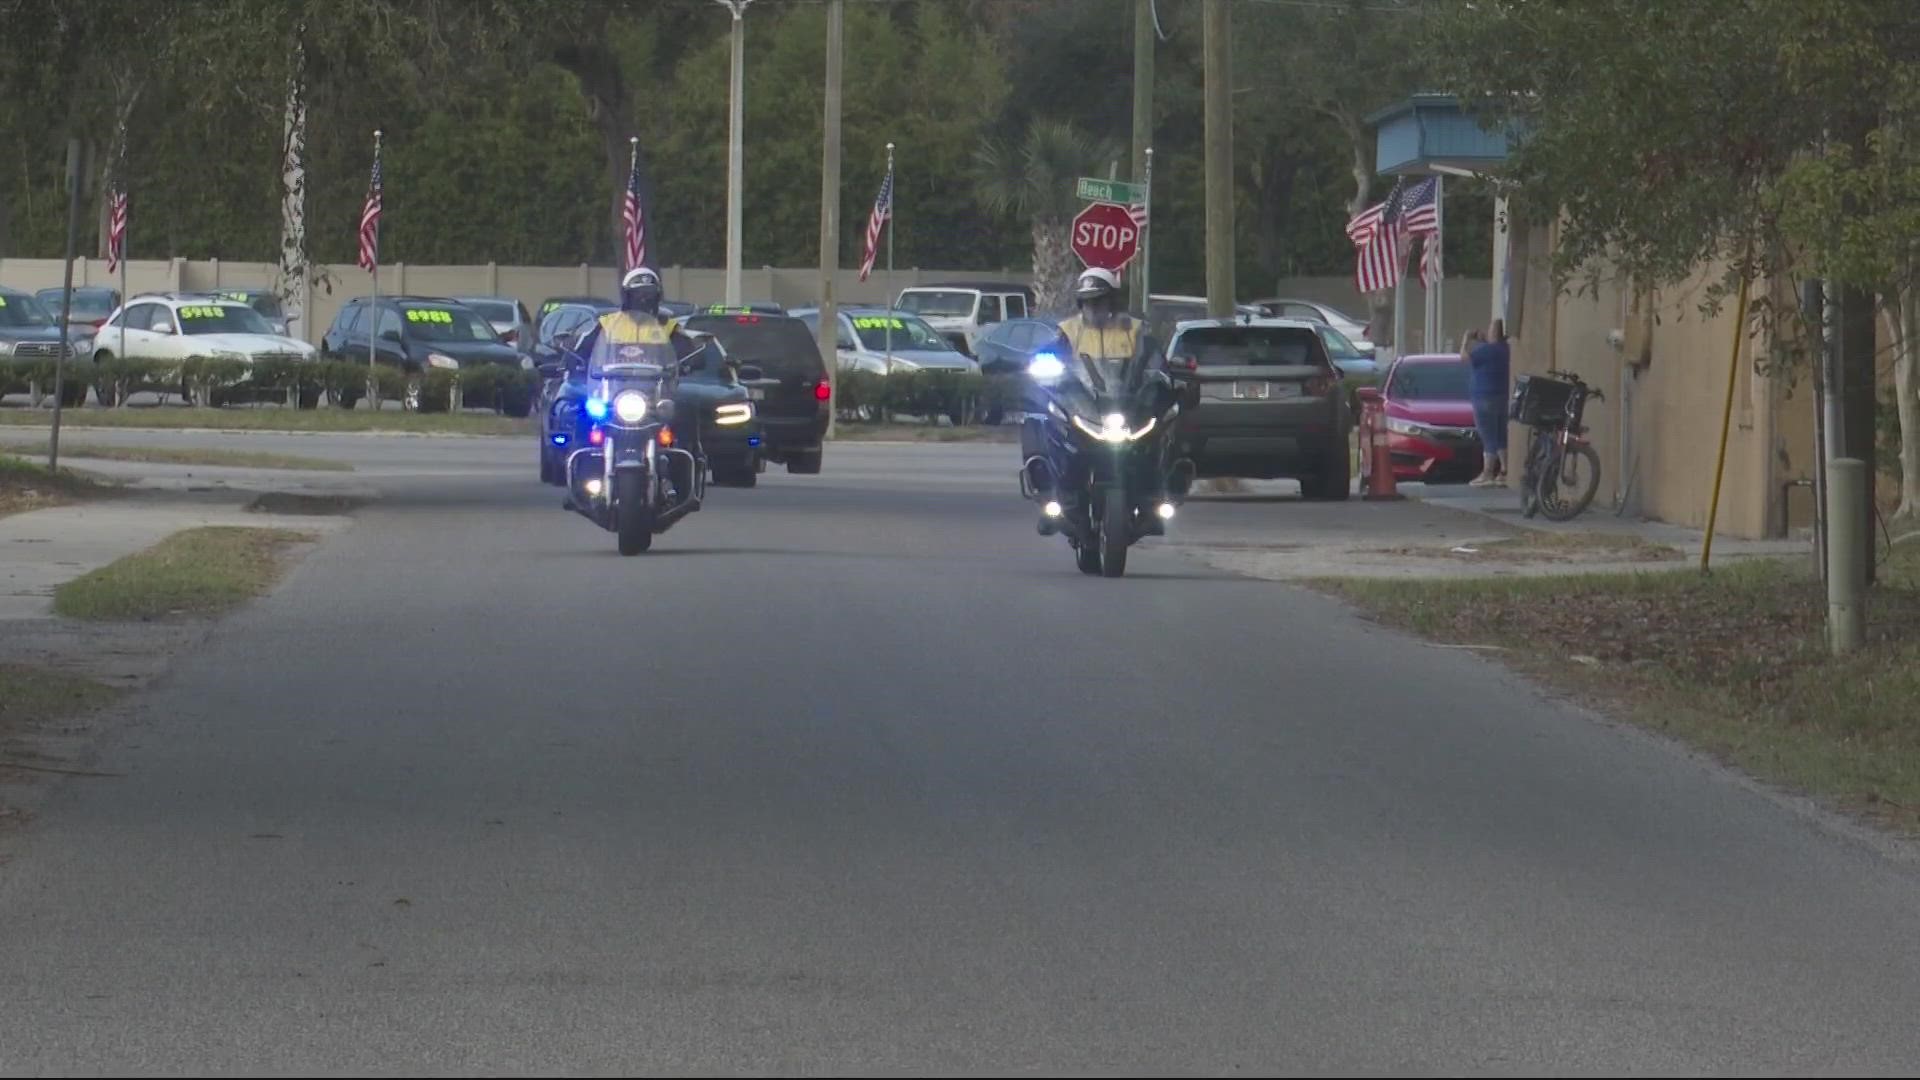 The team rode from Ft. Myers to Jacksonville over the course of 8 days, honoring 85 Florida fallen first responders.